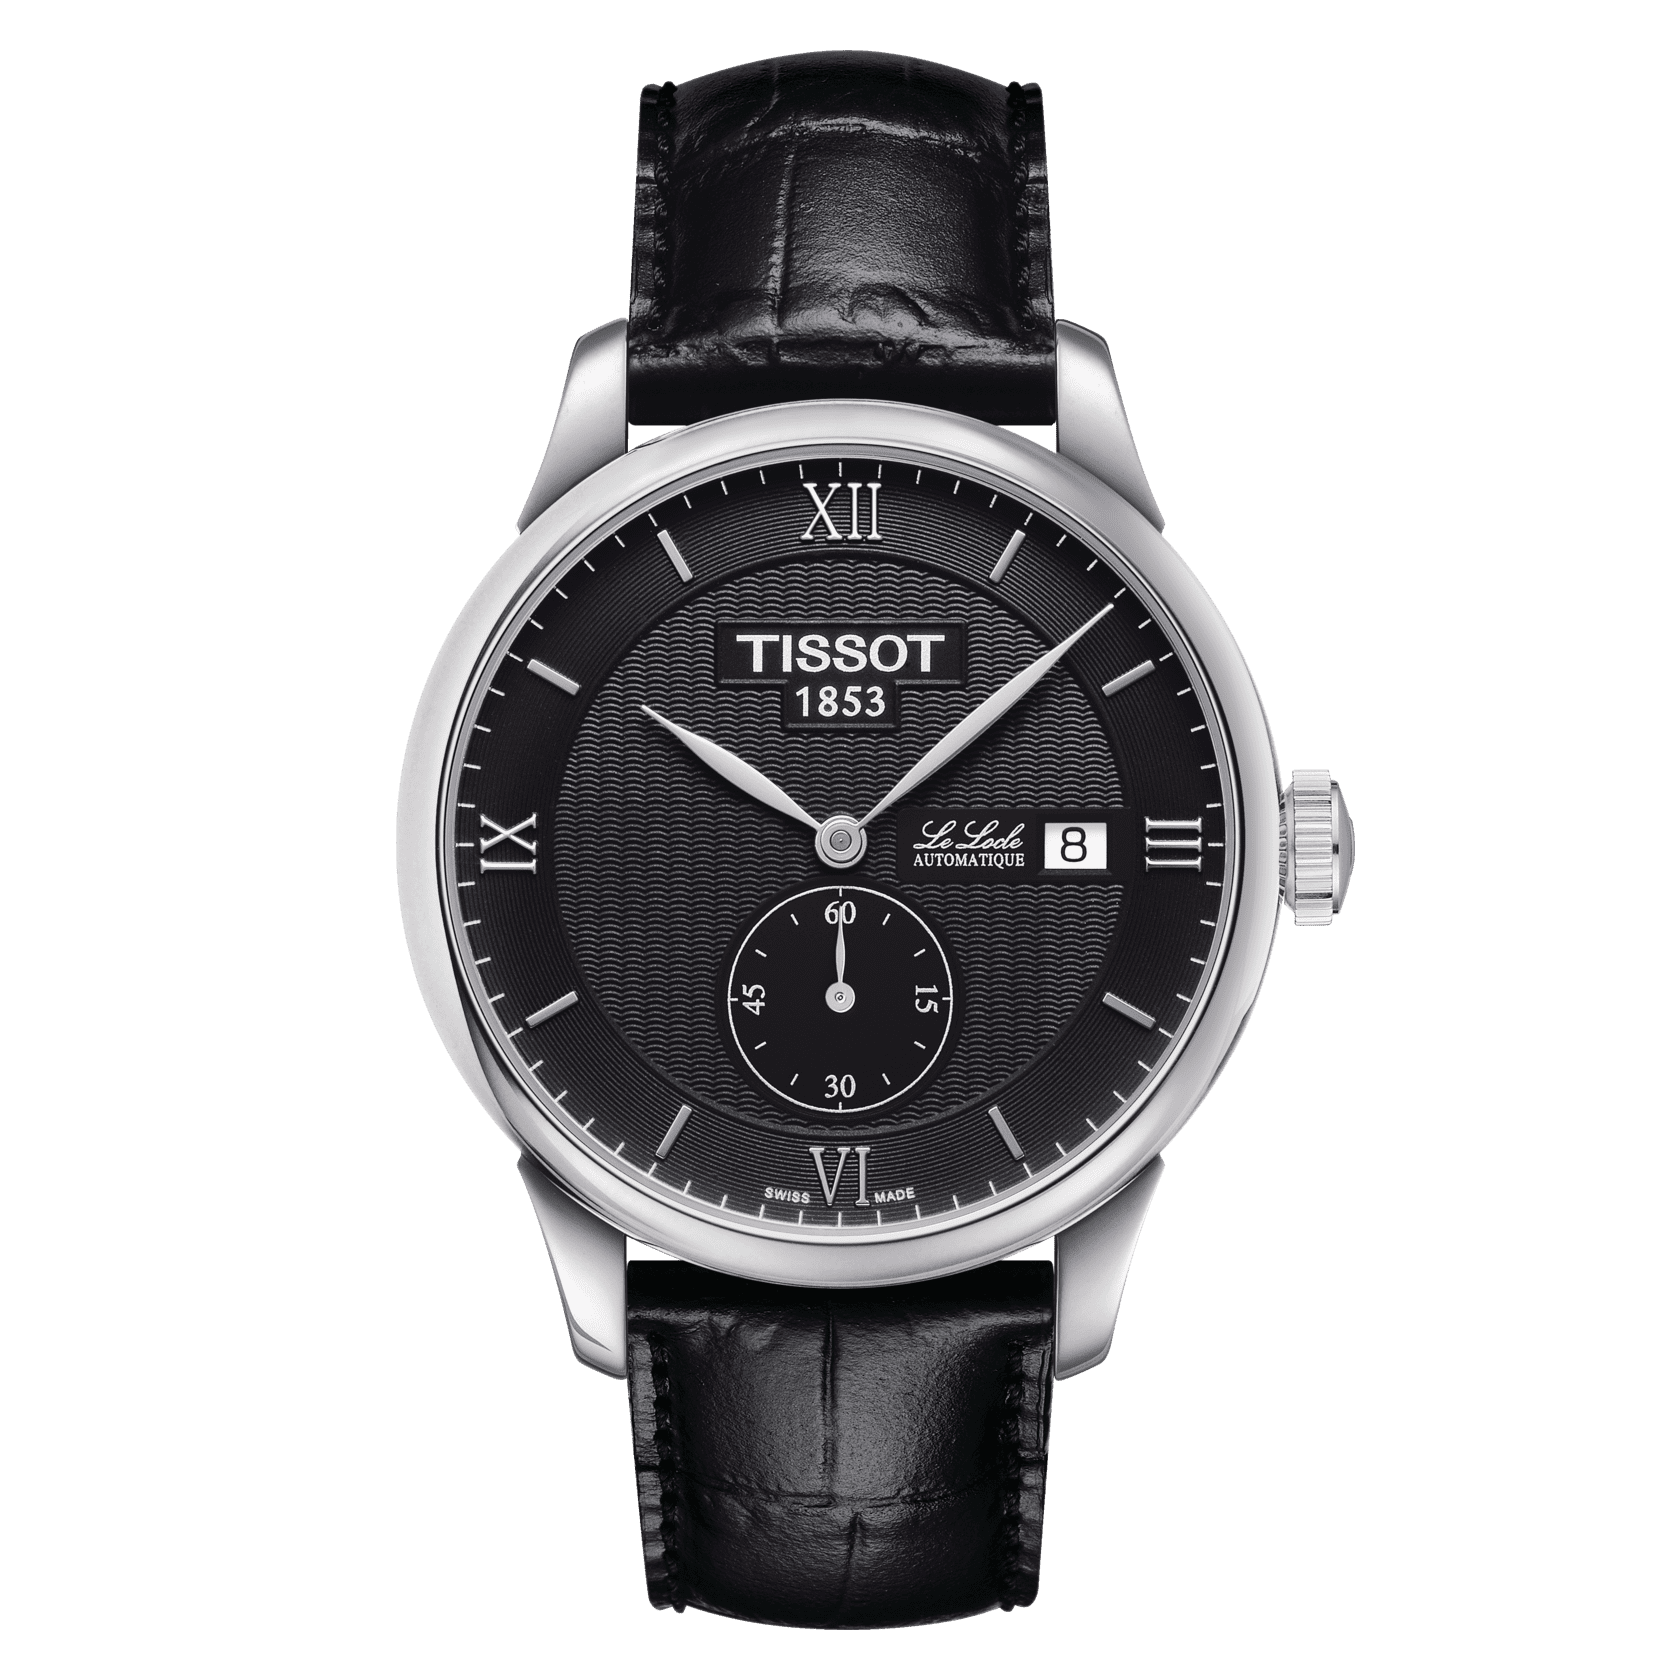 Fakes Jaquet Droz Watches